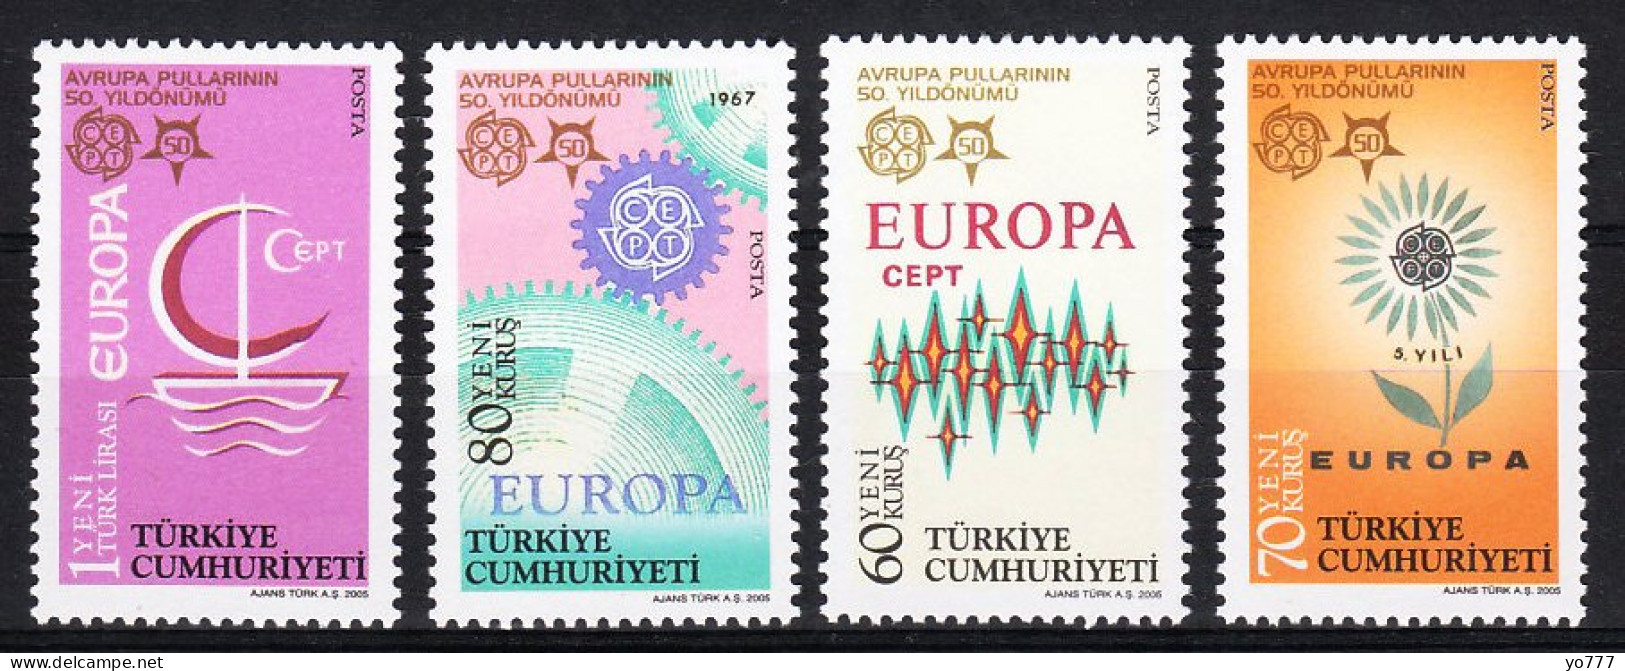 (3487-90) EUROPA (C.E.P.T.) - 50 YEARS OF EUROPA STAMPS SET MNH** - Ungebraucht